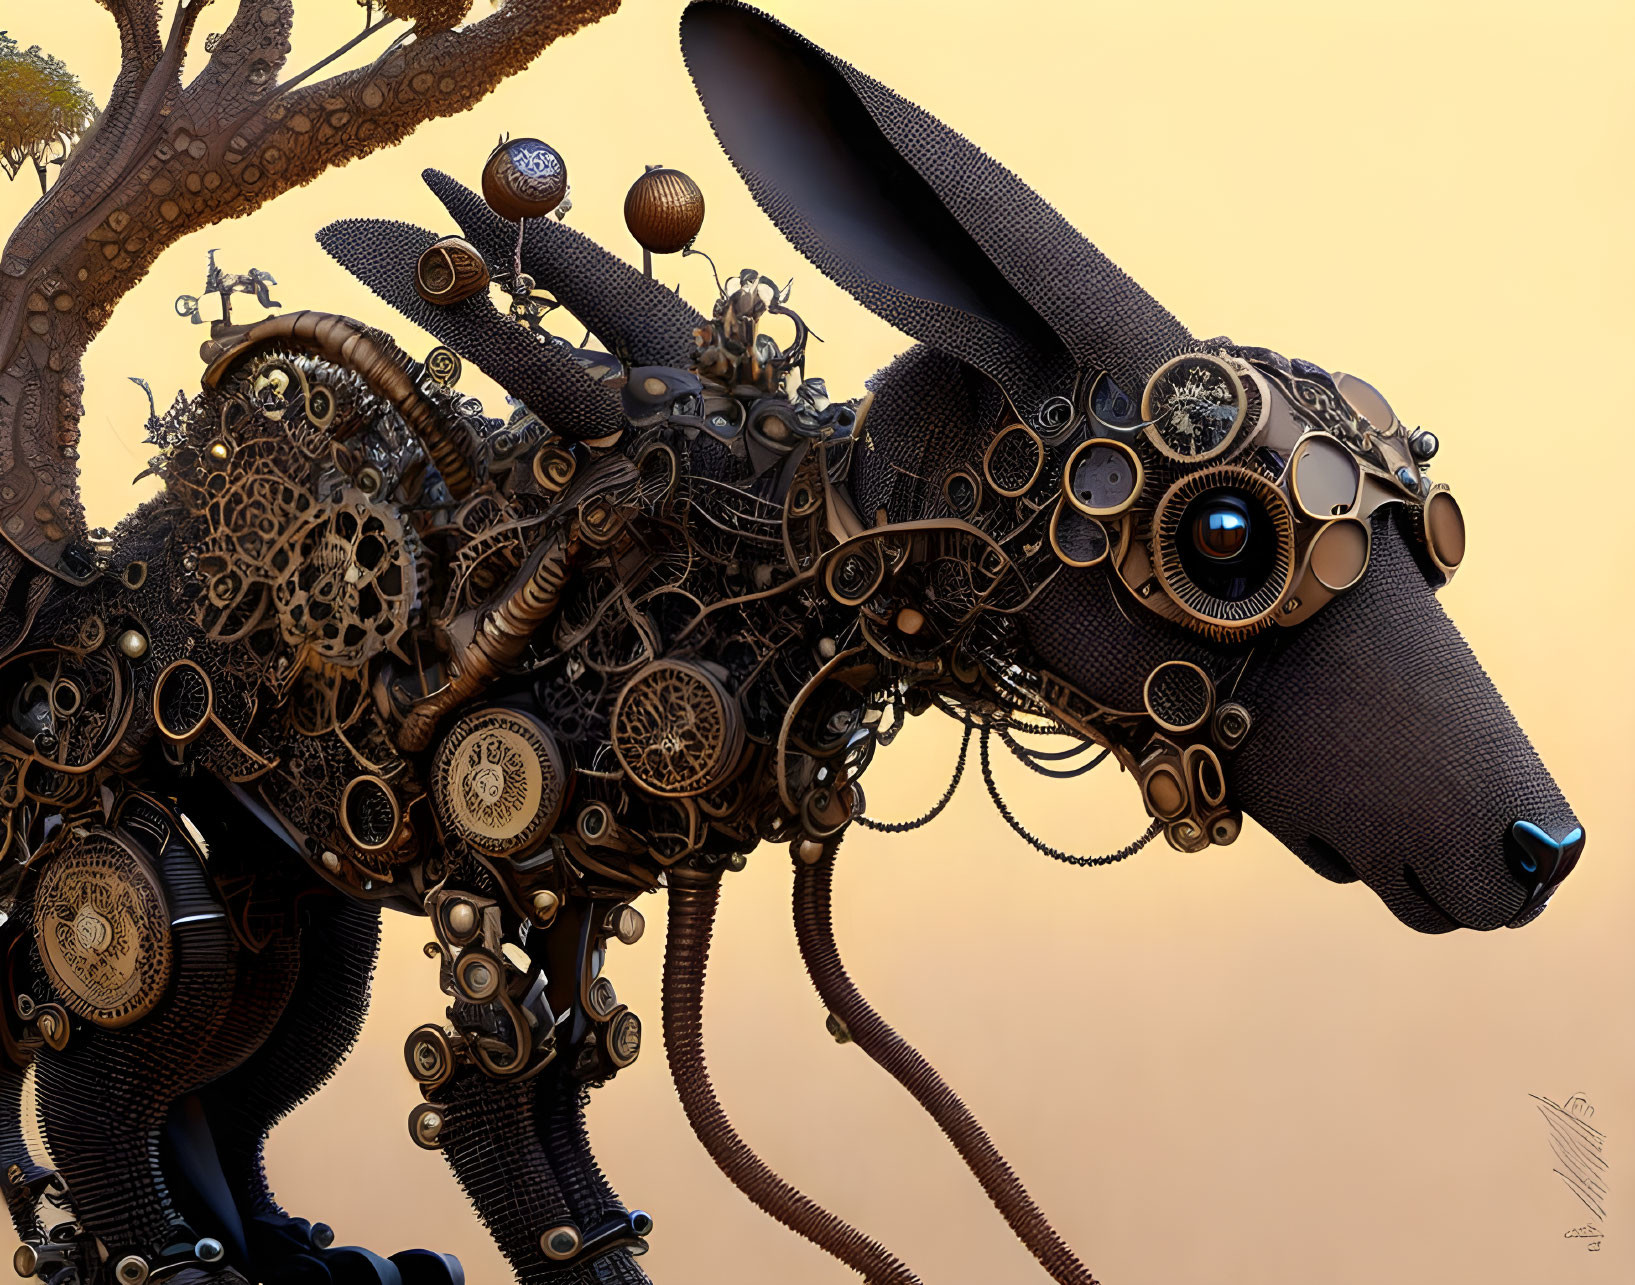 Steampunk-inspired mechanical rabbit sculpture with intricate gears and cogs on warm backdrop